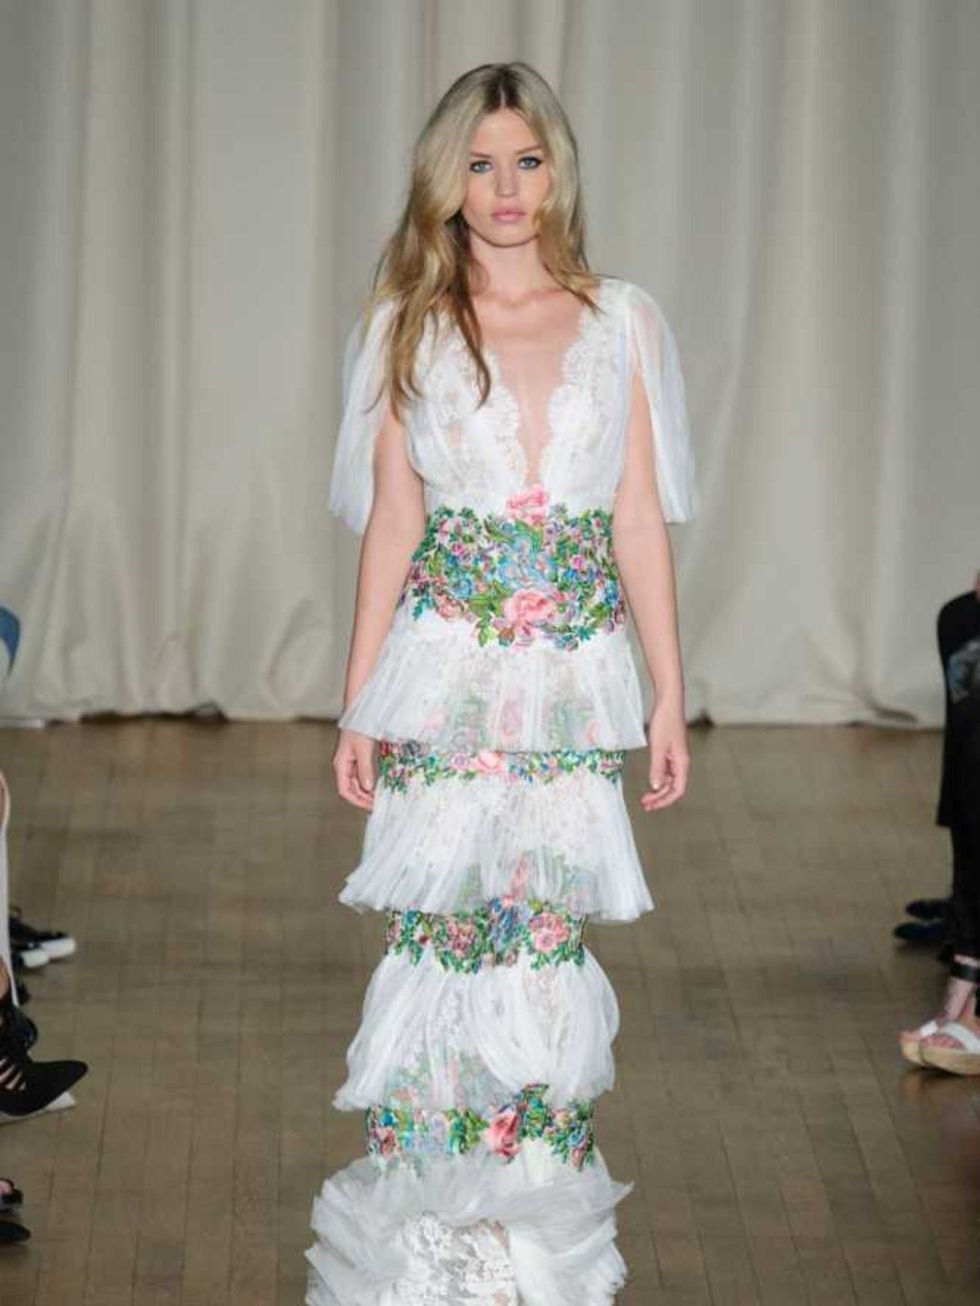 <p>#9 <a href="http://www.elleuk.com/catwalk/marchesa/spring-summer-2015#image=1">Marchesa</a></p>

<p><a href="http://www.elleuk.com/fashion/news/london-fashion-week-show-review-marchesa-lucas-nascimento-holly-fulton-spring-summer-2015">Read the review n